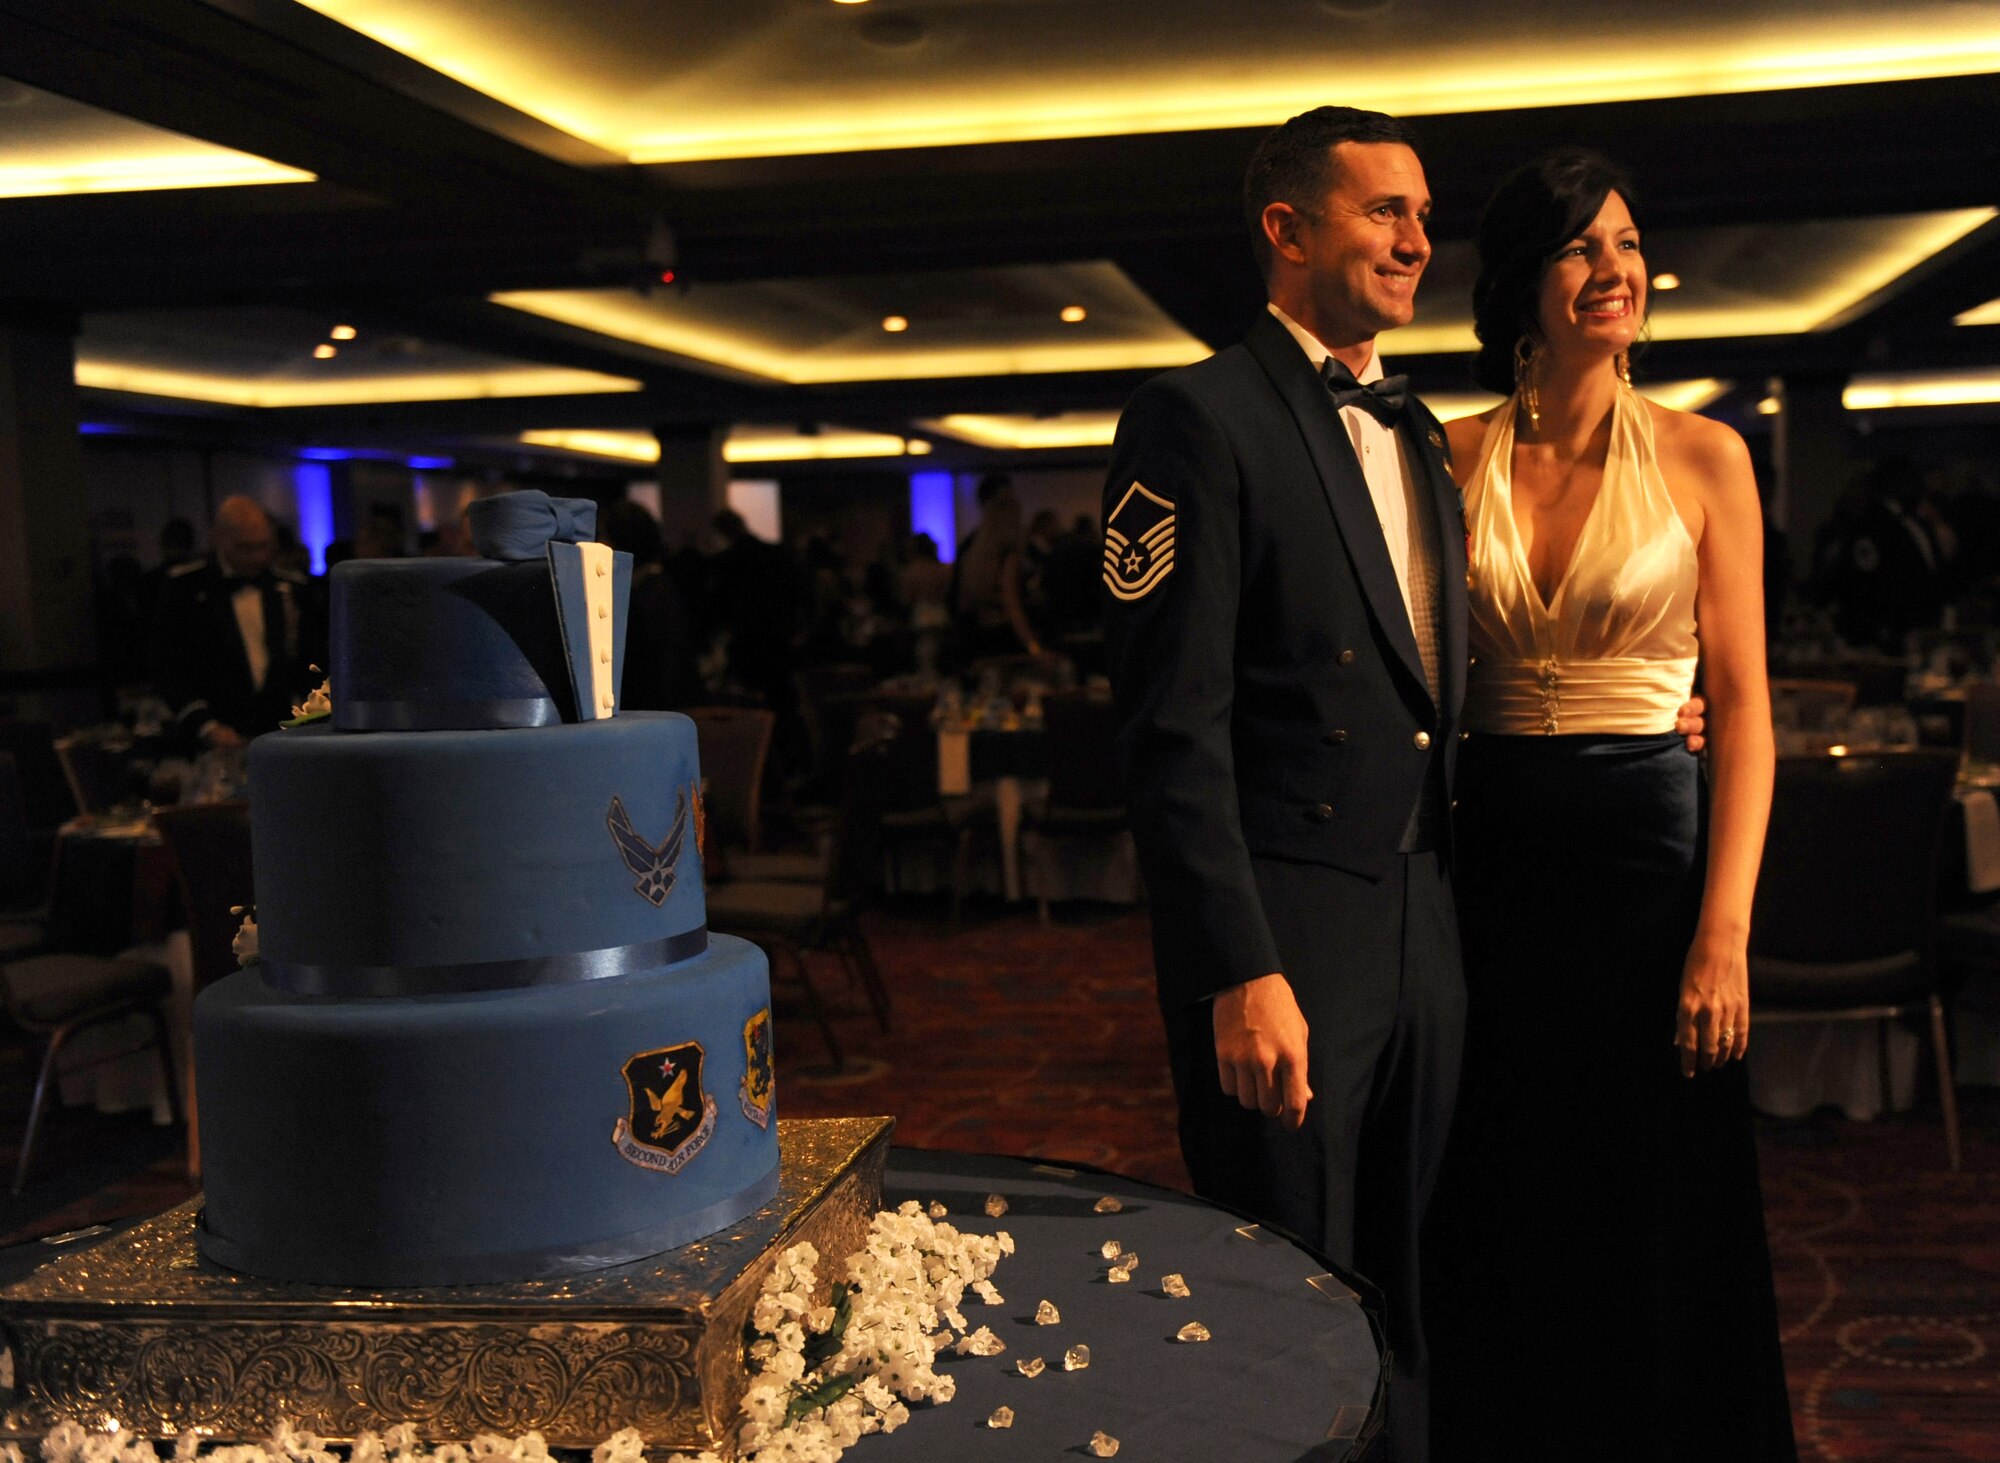 Master Sgt. Jason Burdett, 81st Comptroller Squadron first sergeant, and his wife, Stephanie, pose for a photo during the Keesler Air Force Ball at the Imperial Palace Casino Sept. 24, 2016, Biloxi, Miss. The event was sponsored by the Air Force Association John C. Stennis Chapter #332 to celebrate the Air Force’s 69th birthday and the base’s 75th anniversary. (U.S. Air Force photo by Kemberly Groue/Released)